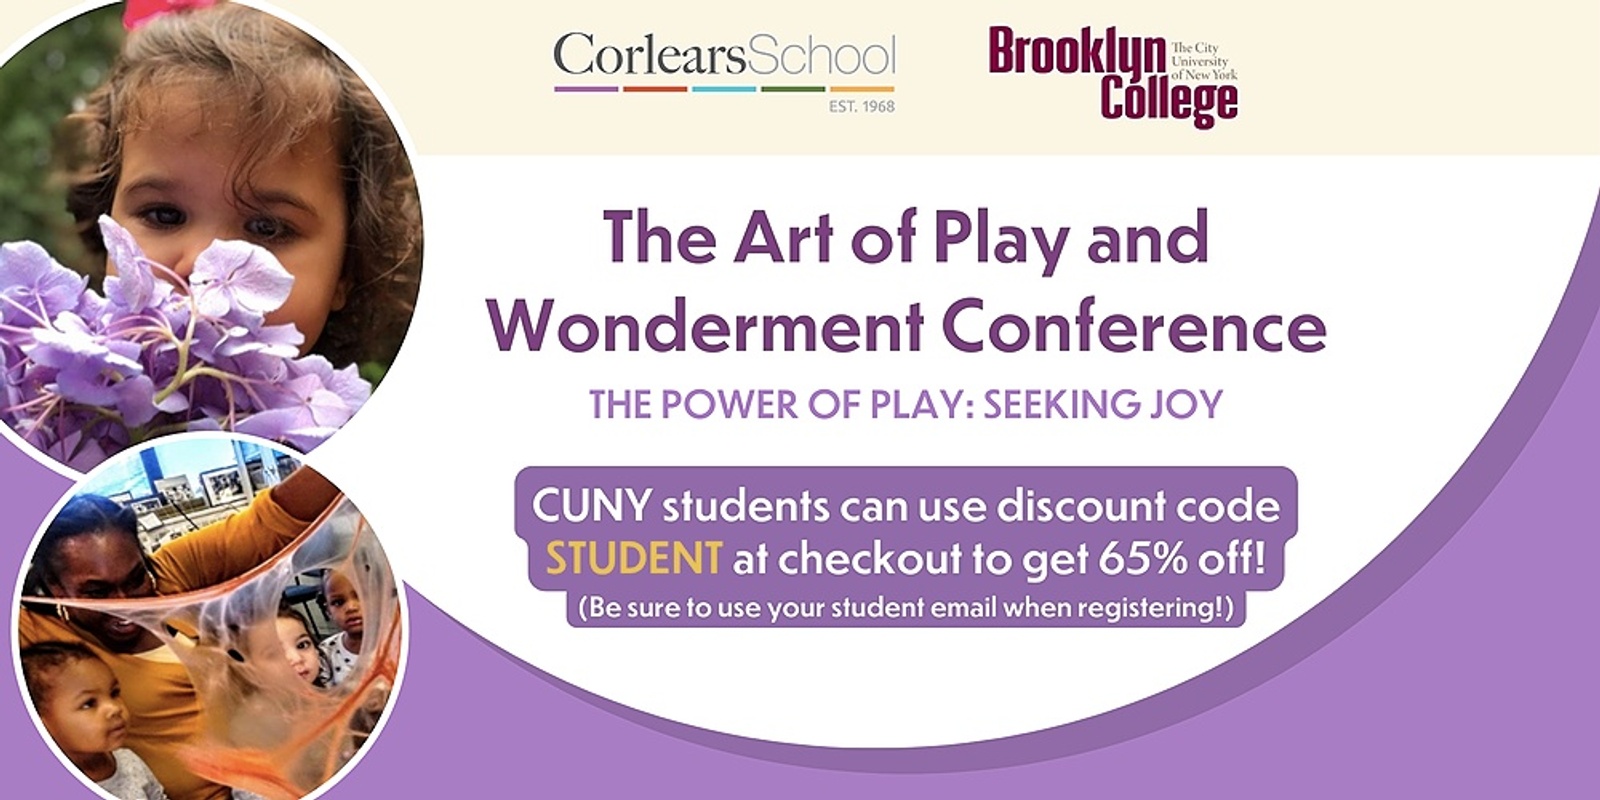 The 4th Annual Art of Play and Wonderment Conference